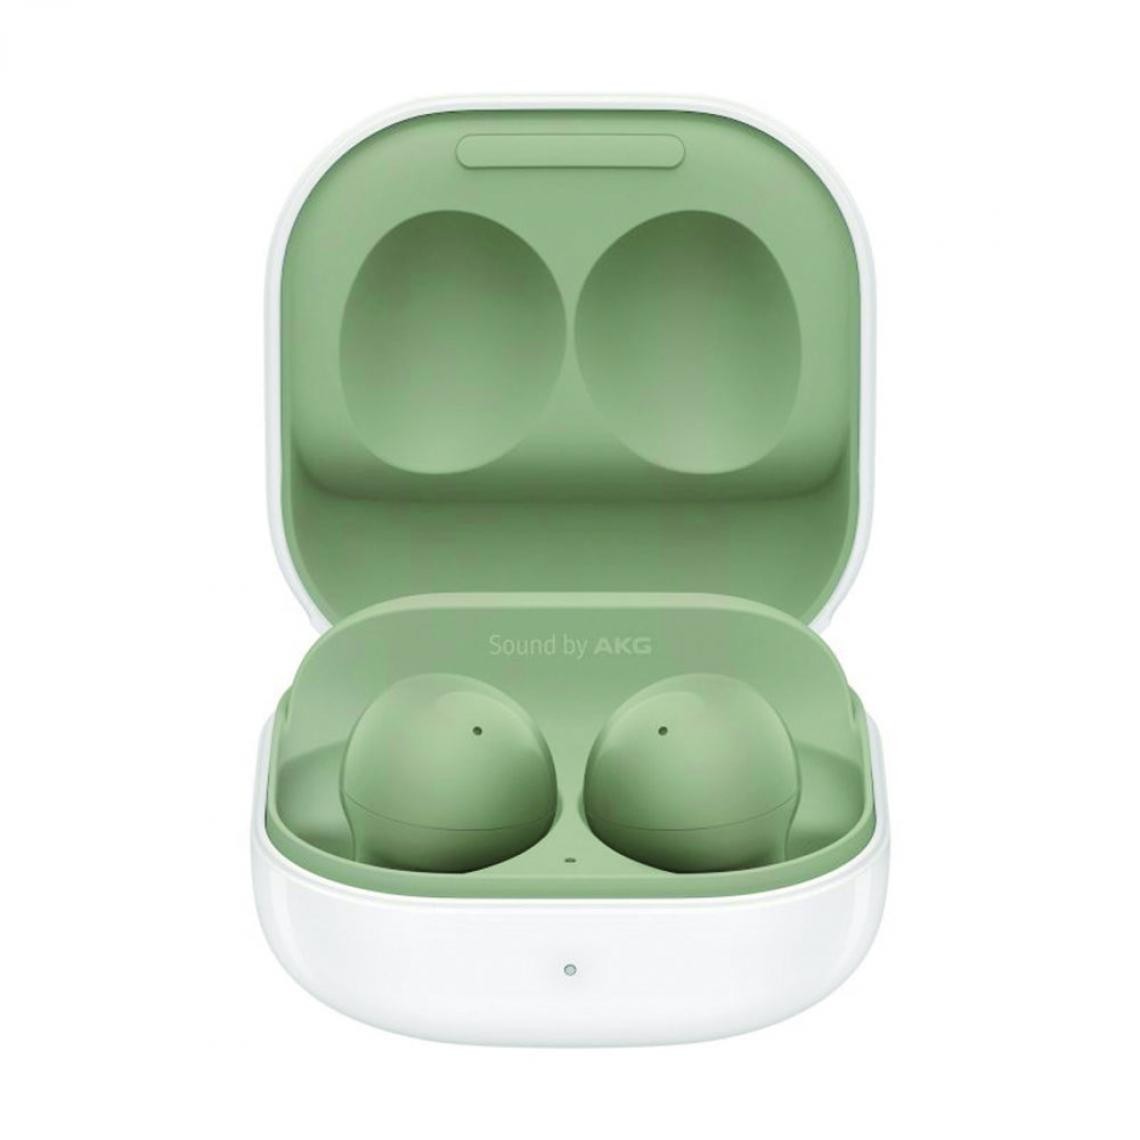 Samsung - Samsung Galaxy Buds2 Vert Olive (Olive) R177 - Ecouteurs intra-auriculaires